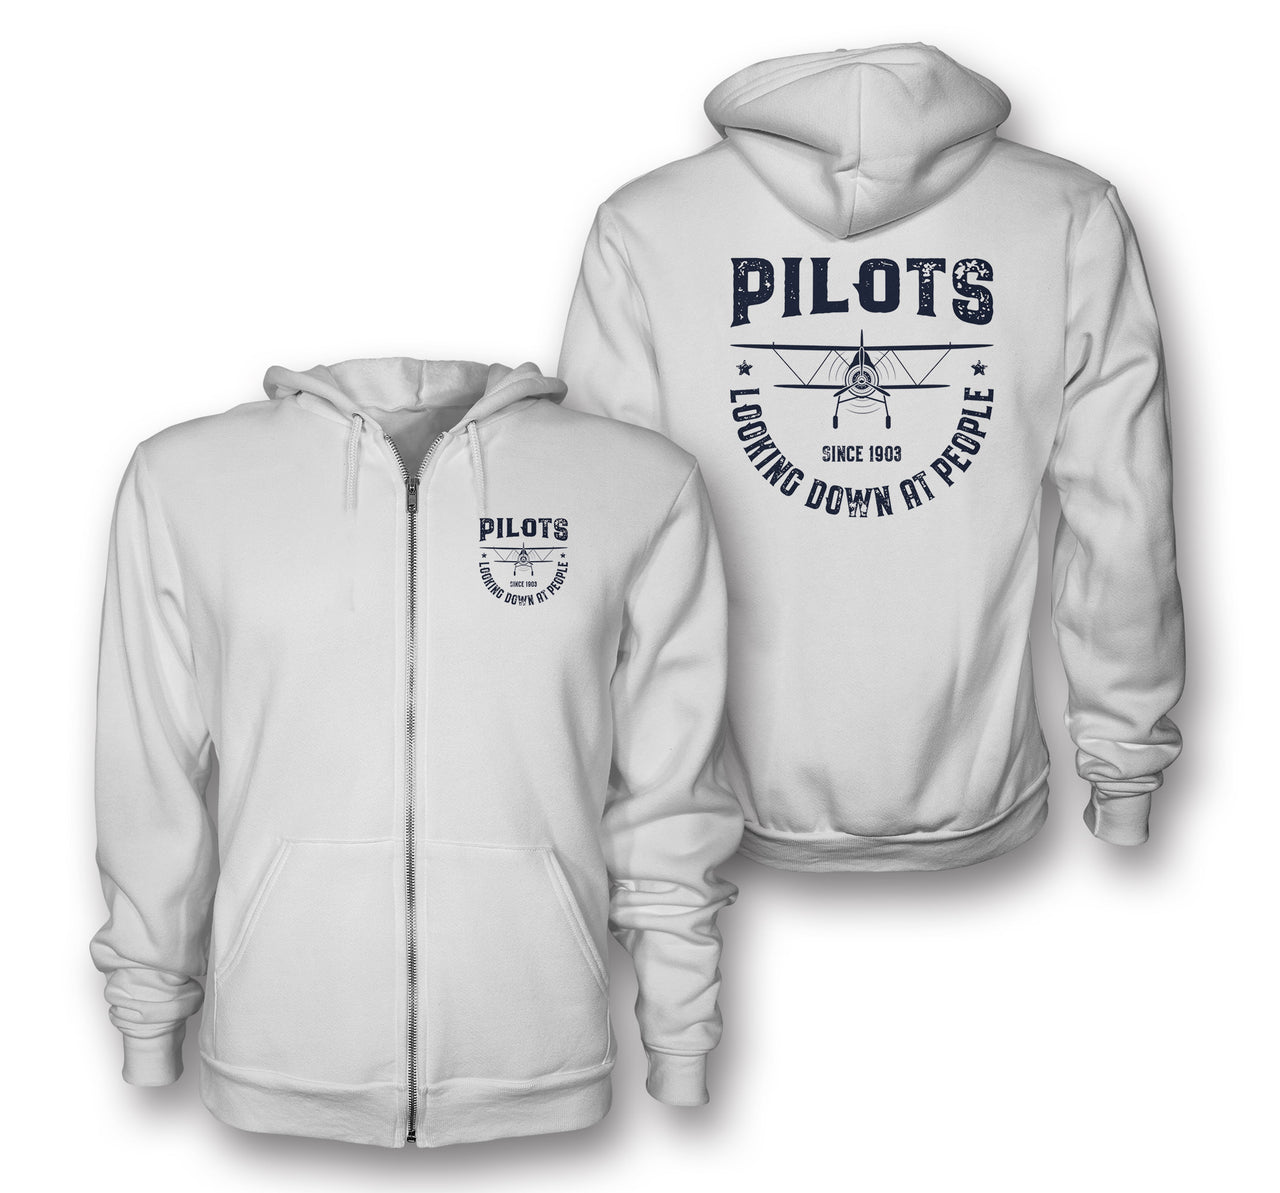 Pilots Looking Down at People Since 1903 Designed Zipped Hoodies